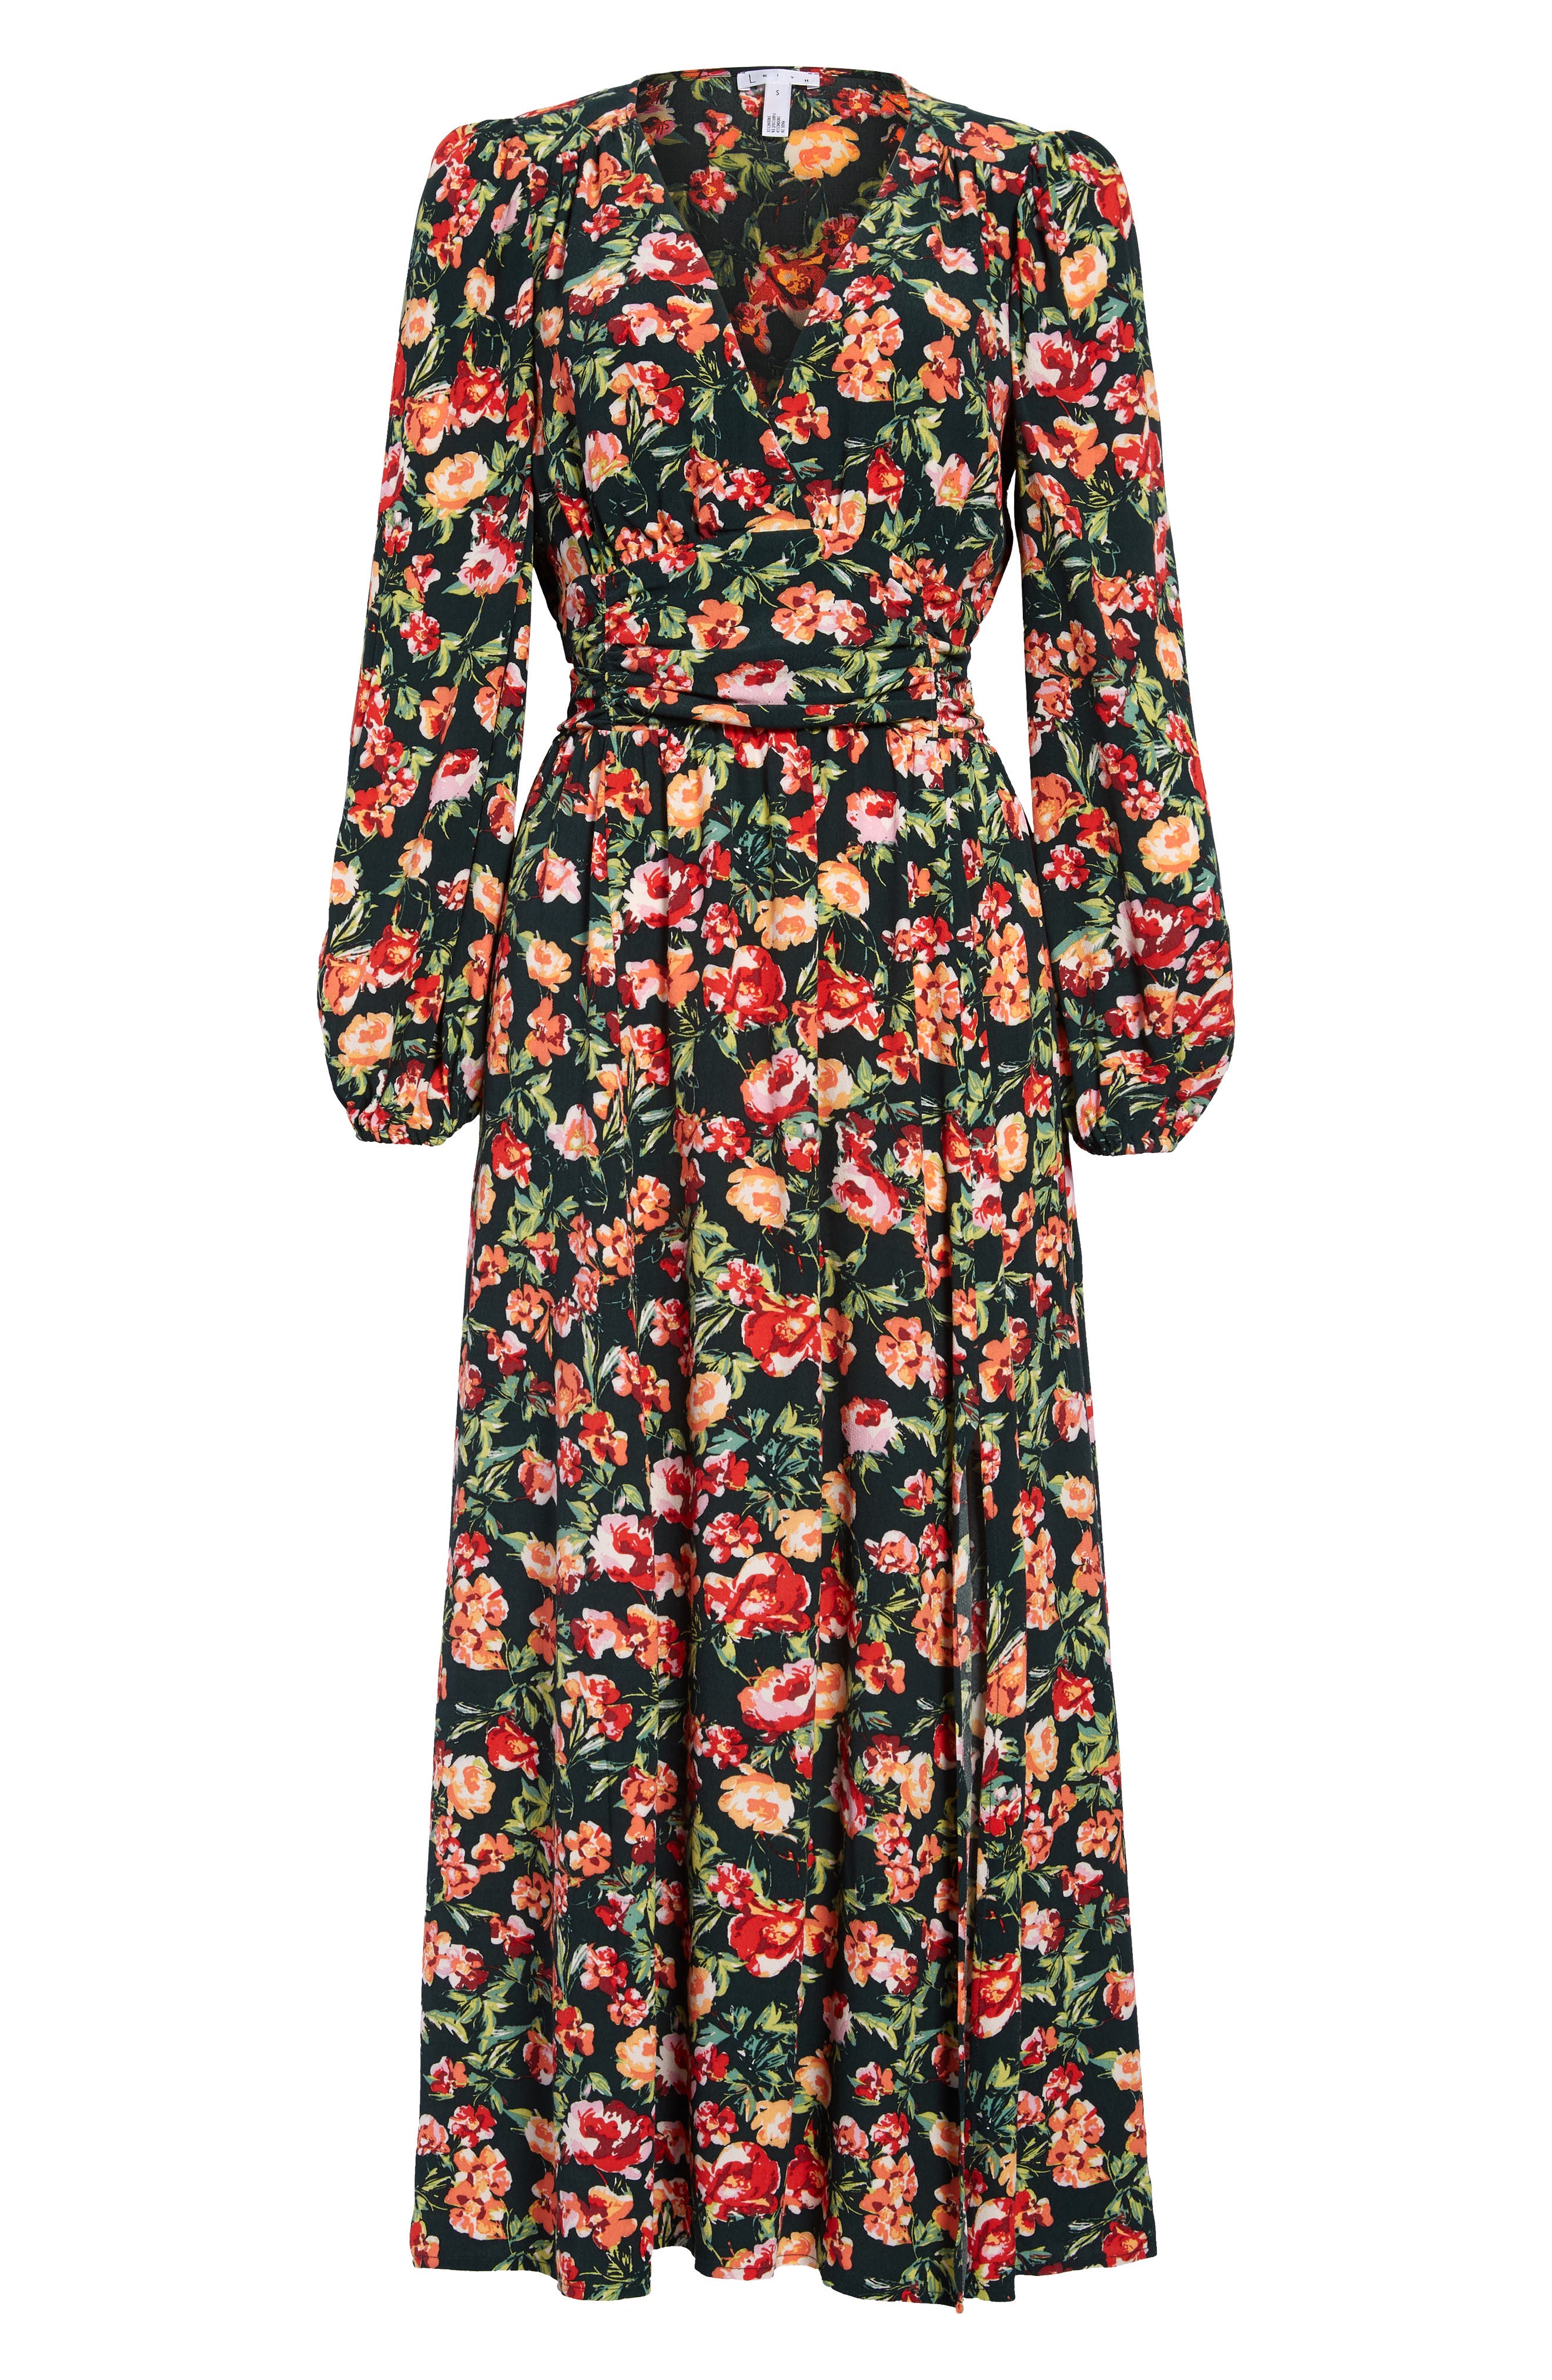 nordstrom maxi dress with sleeves